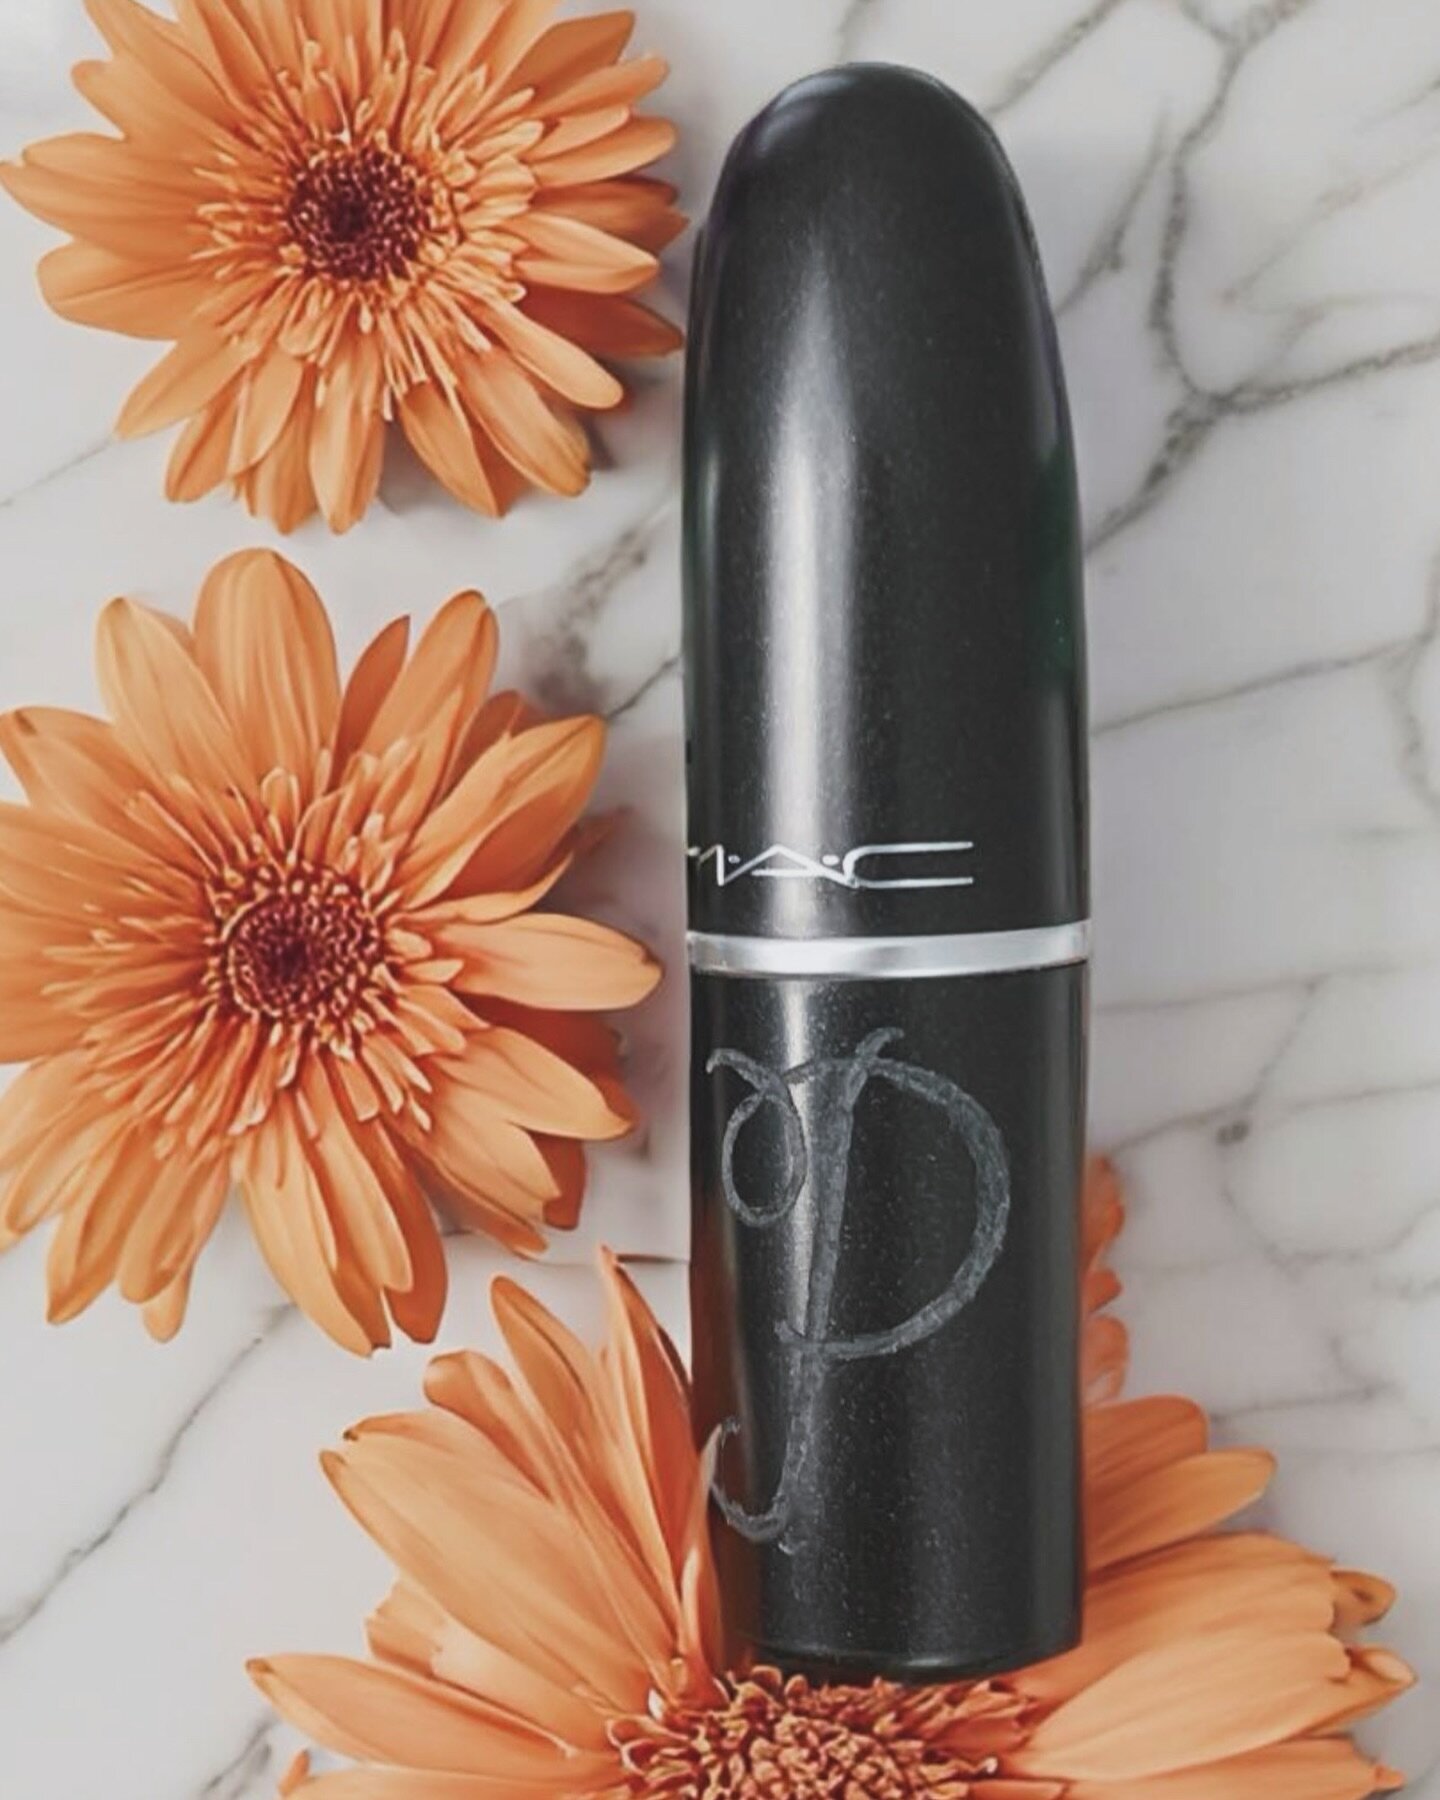 Spring is fast approaching and I&rsquo;m ready to make my mark this season with my with my fave engraved lipstick. 

Pout, pop, and personalize, because why not?

#engraving #calligraphy #spring #maclipstick #bridesmaidgift #engravedlipstick #maccosm